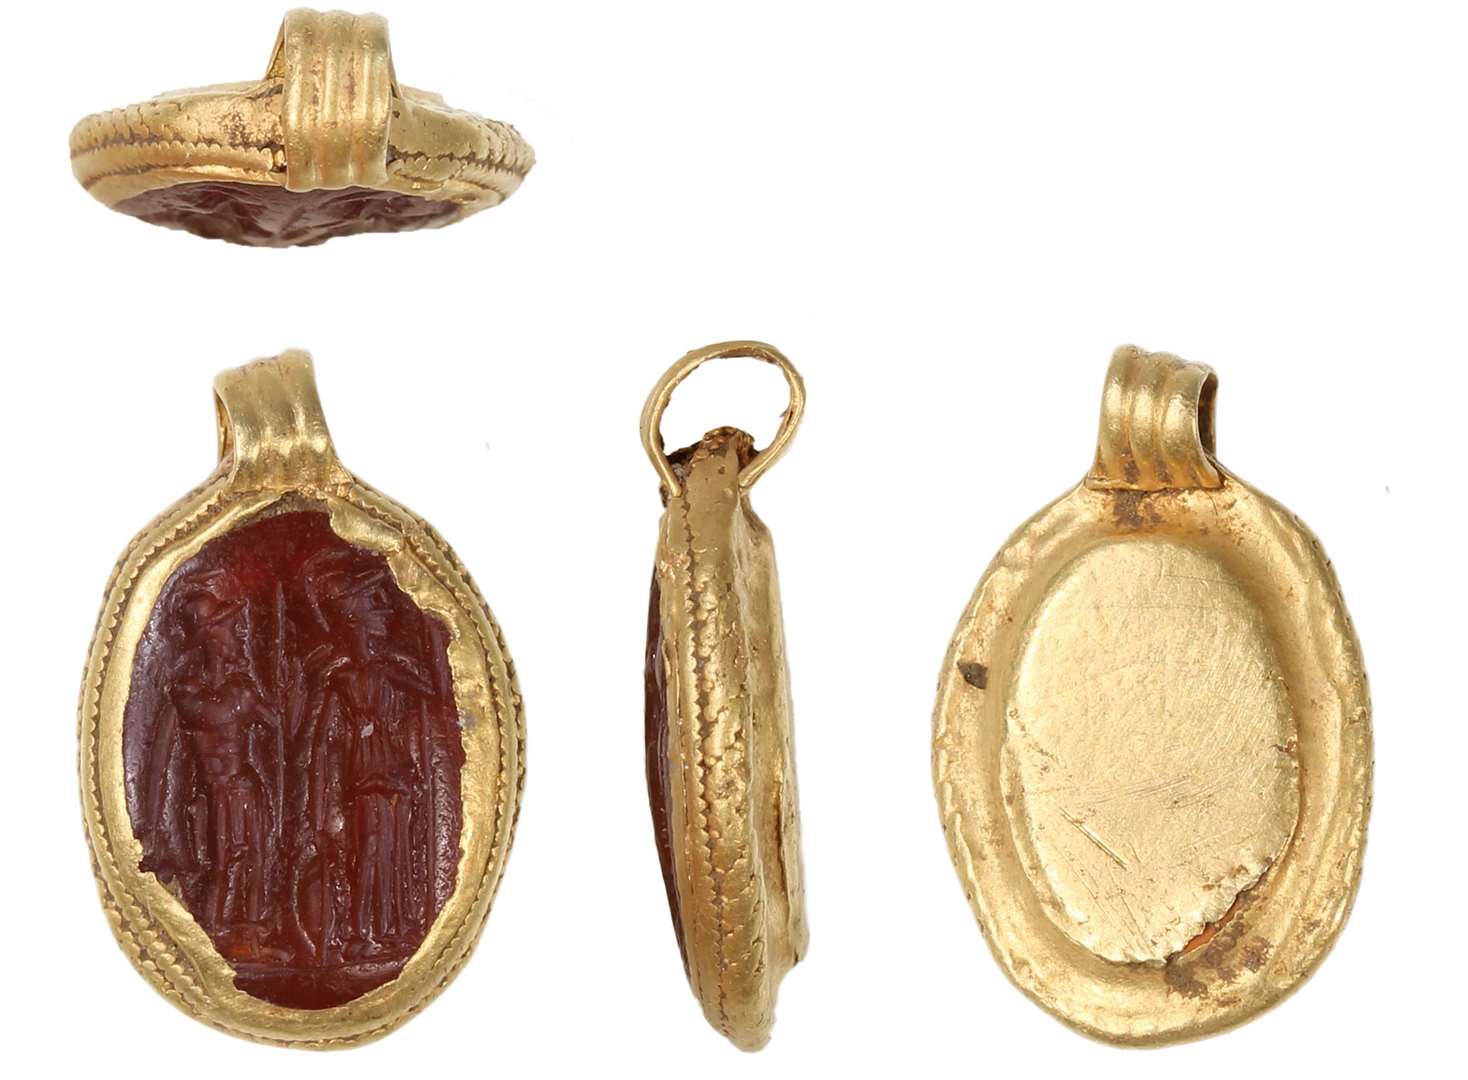 The Anglo Saxon pendant was found in August 2018